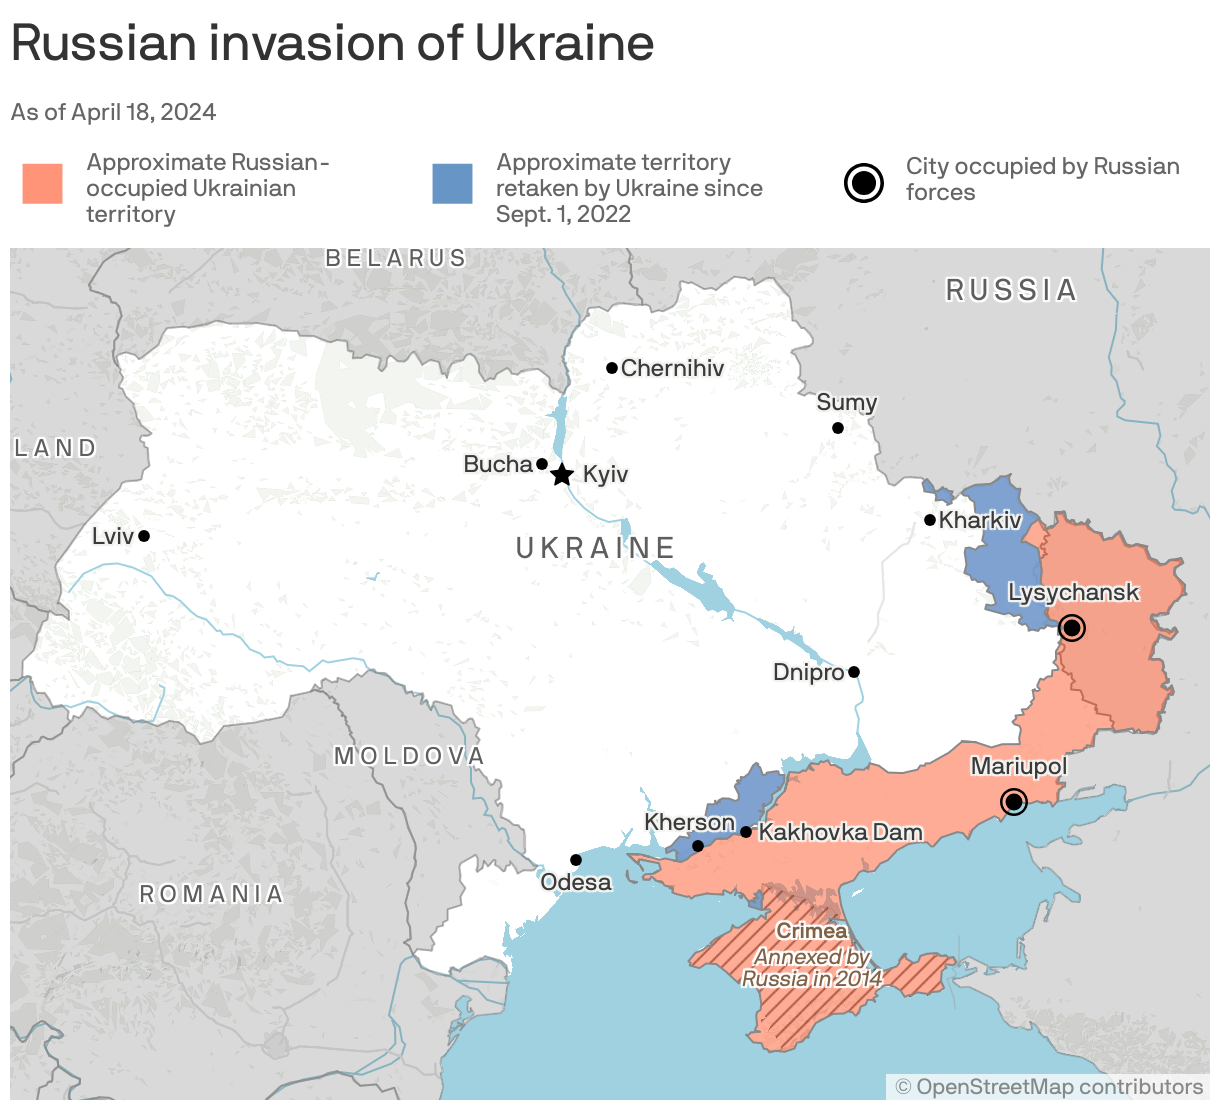 Russian invasion of Ukraine, as of May 10